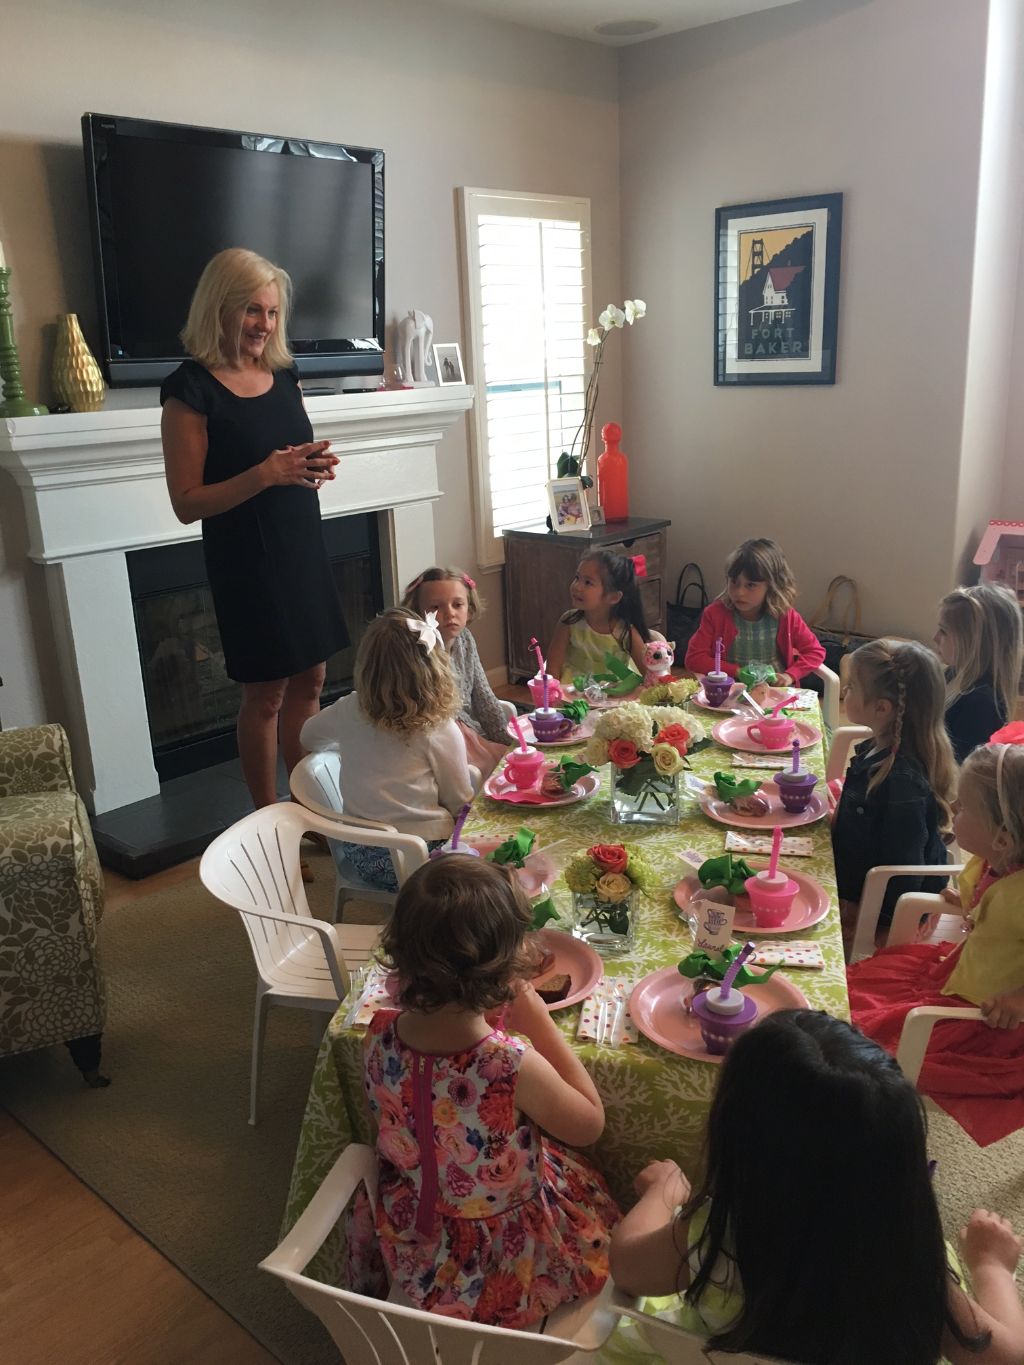 Melanie teaching manners at a birthday party.